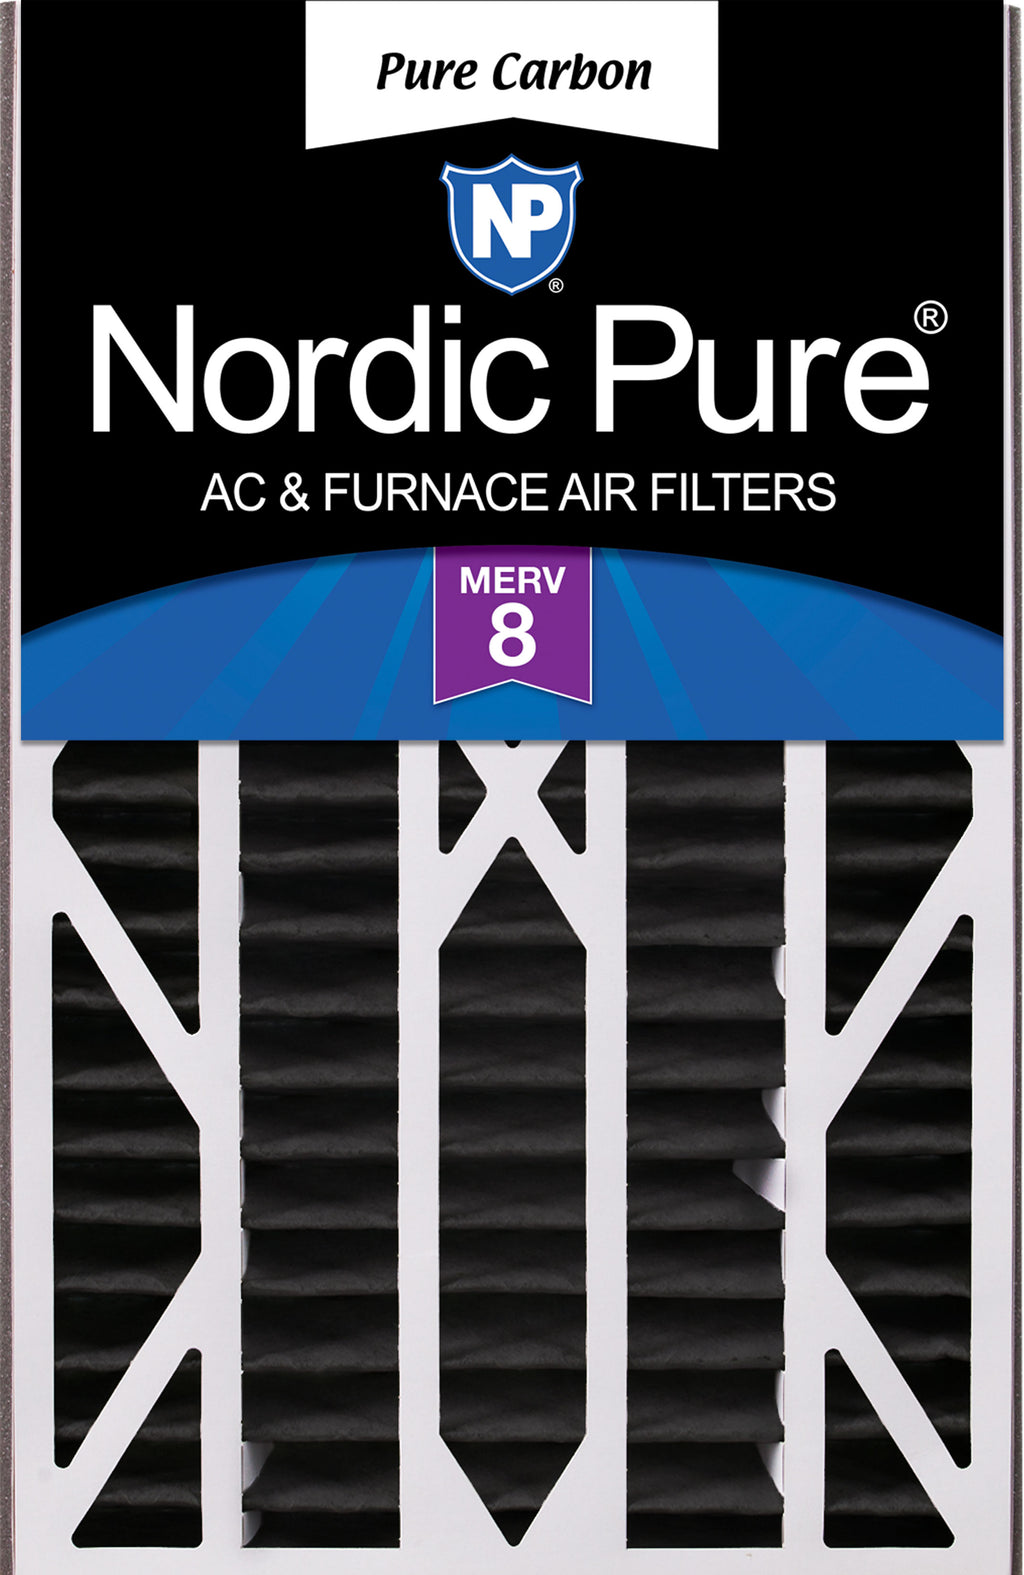 Air Bear Cub 16x25x3 Replacement 259112-101 Pure Carbon Pleated Odor Reduction Merv 8 Furnace Filter